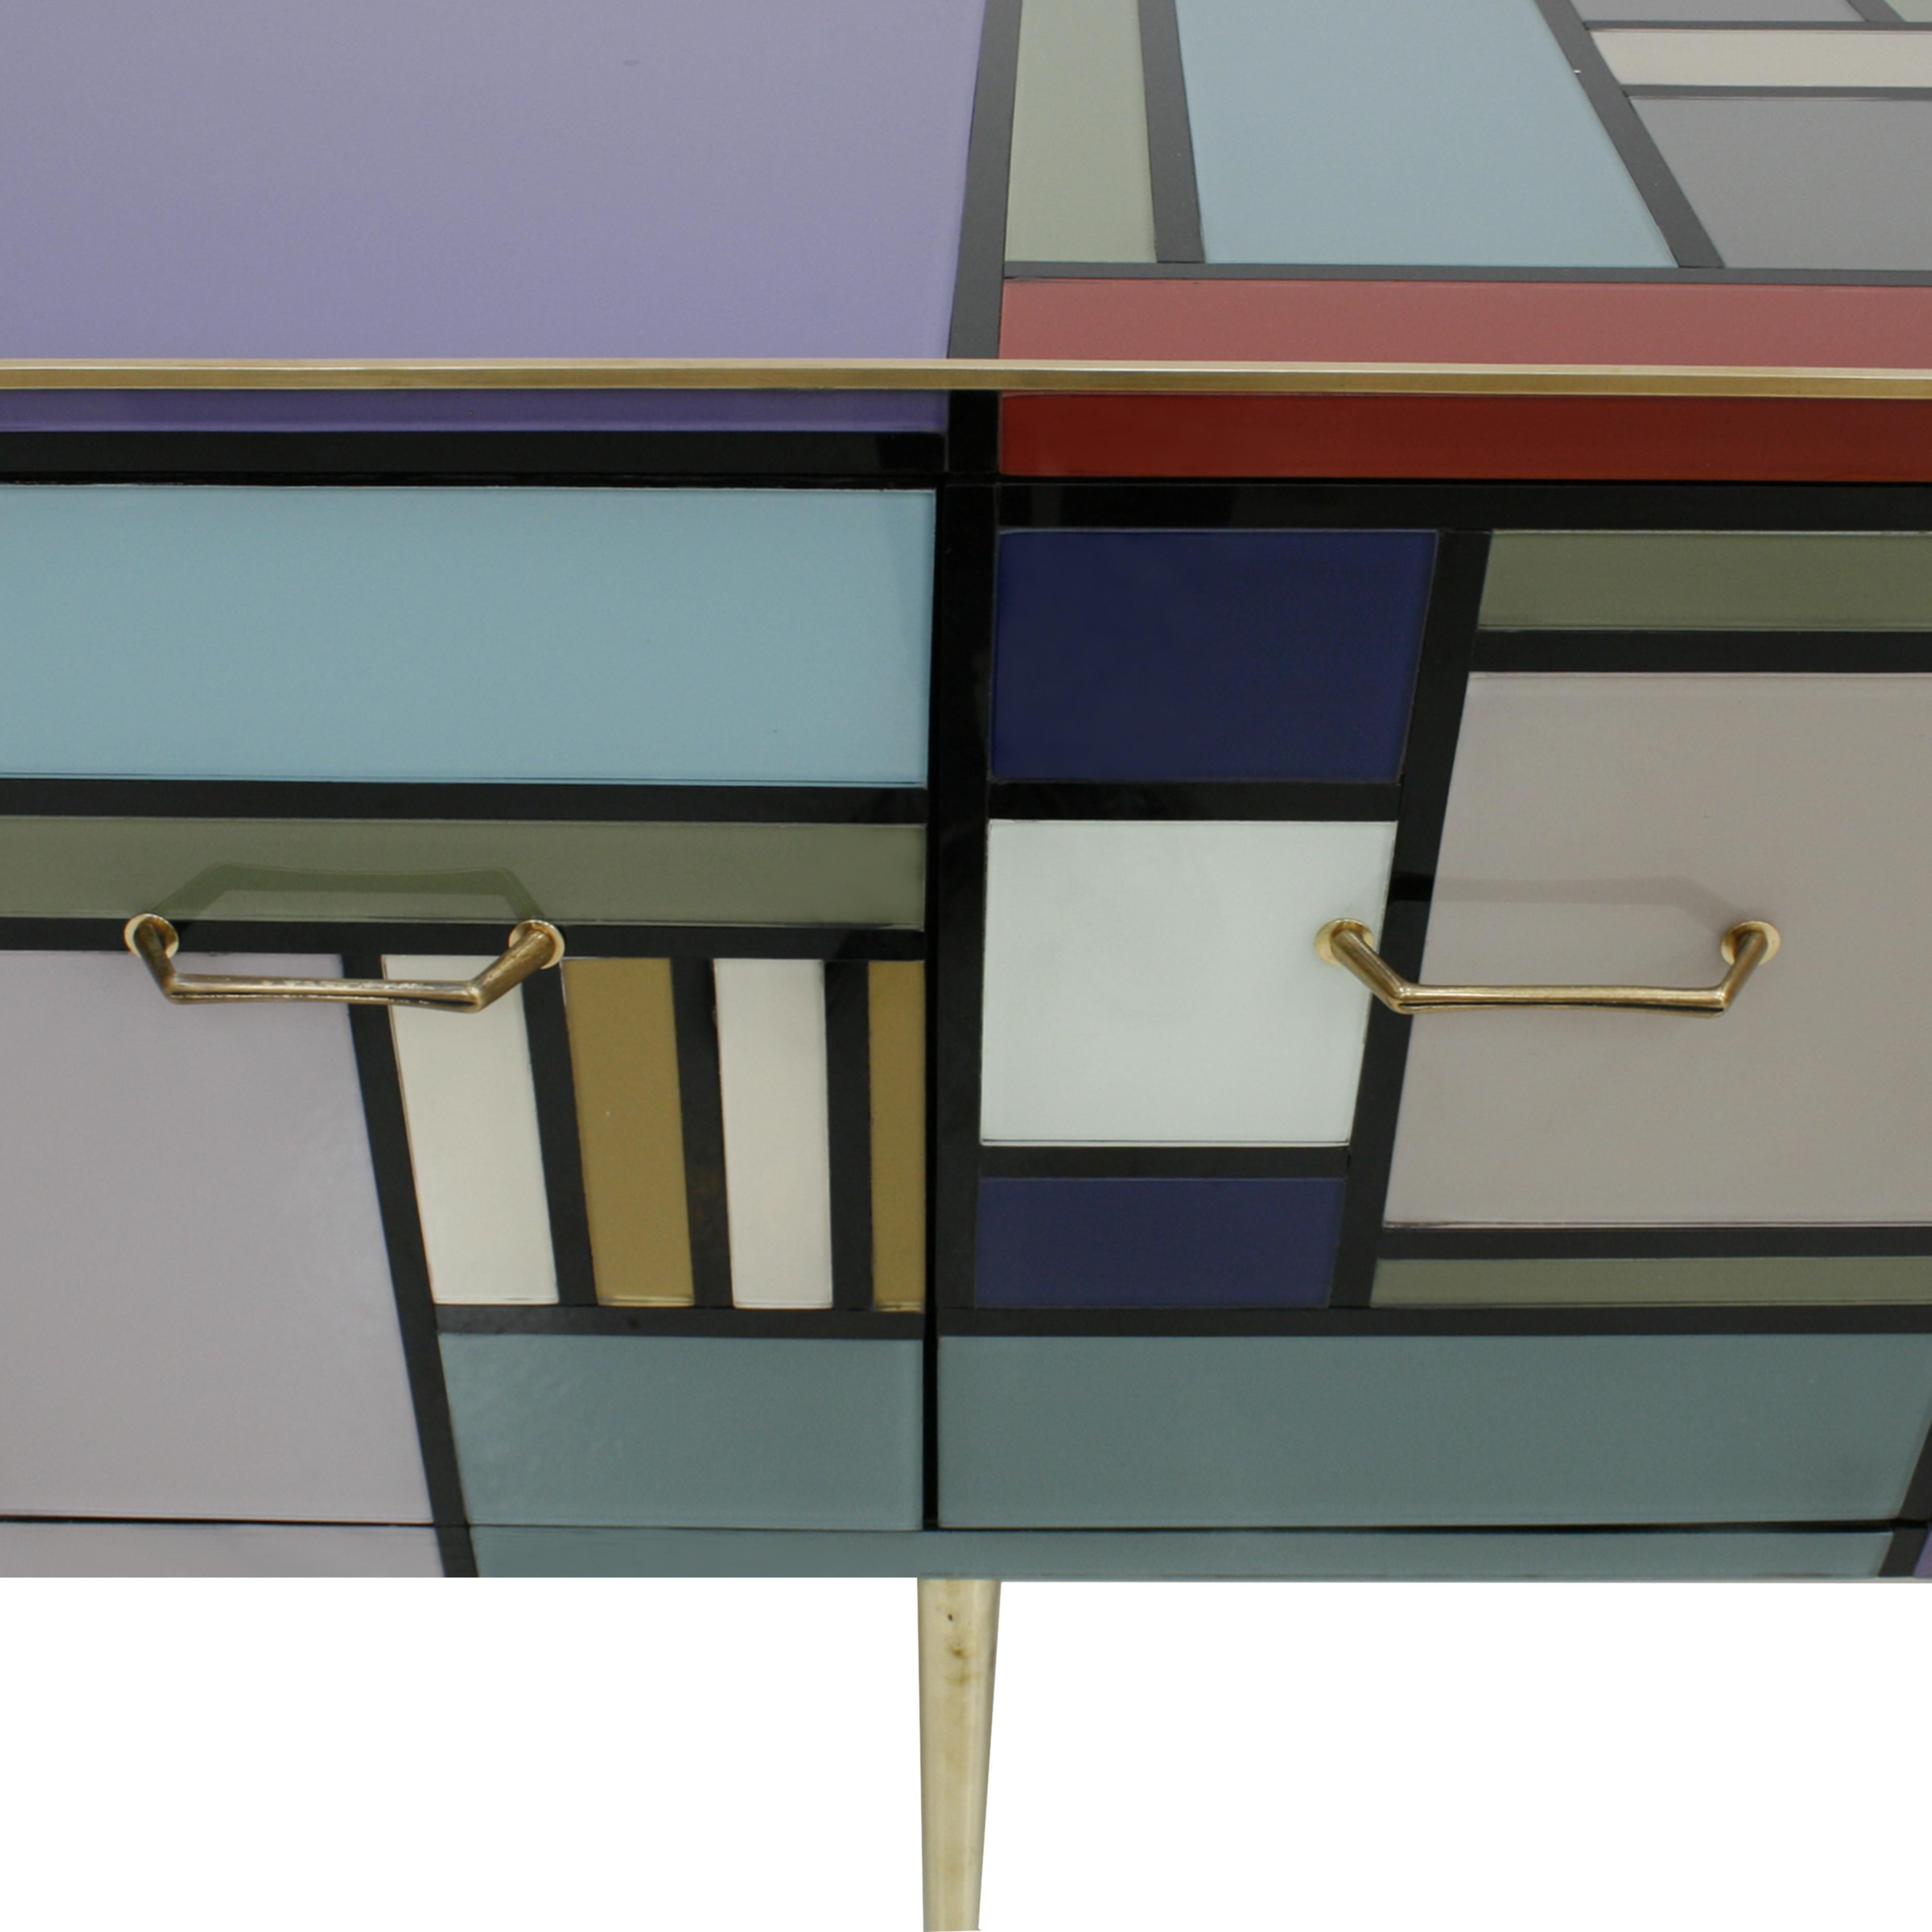 Italian sideboard with four doors and six legs, with wooden structure covered in colored glass and profiles, handles and feet in brass. Made in Italy.